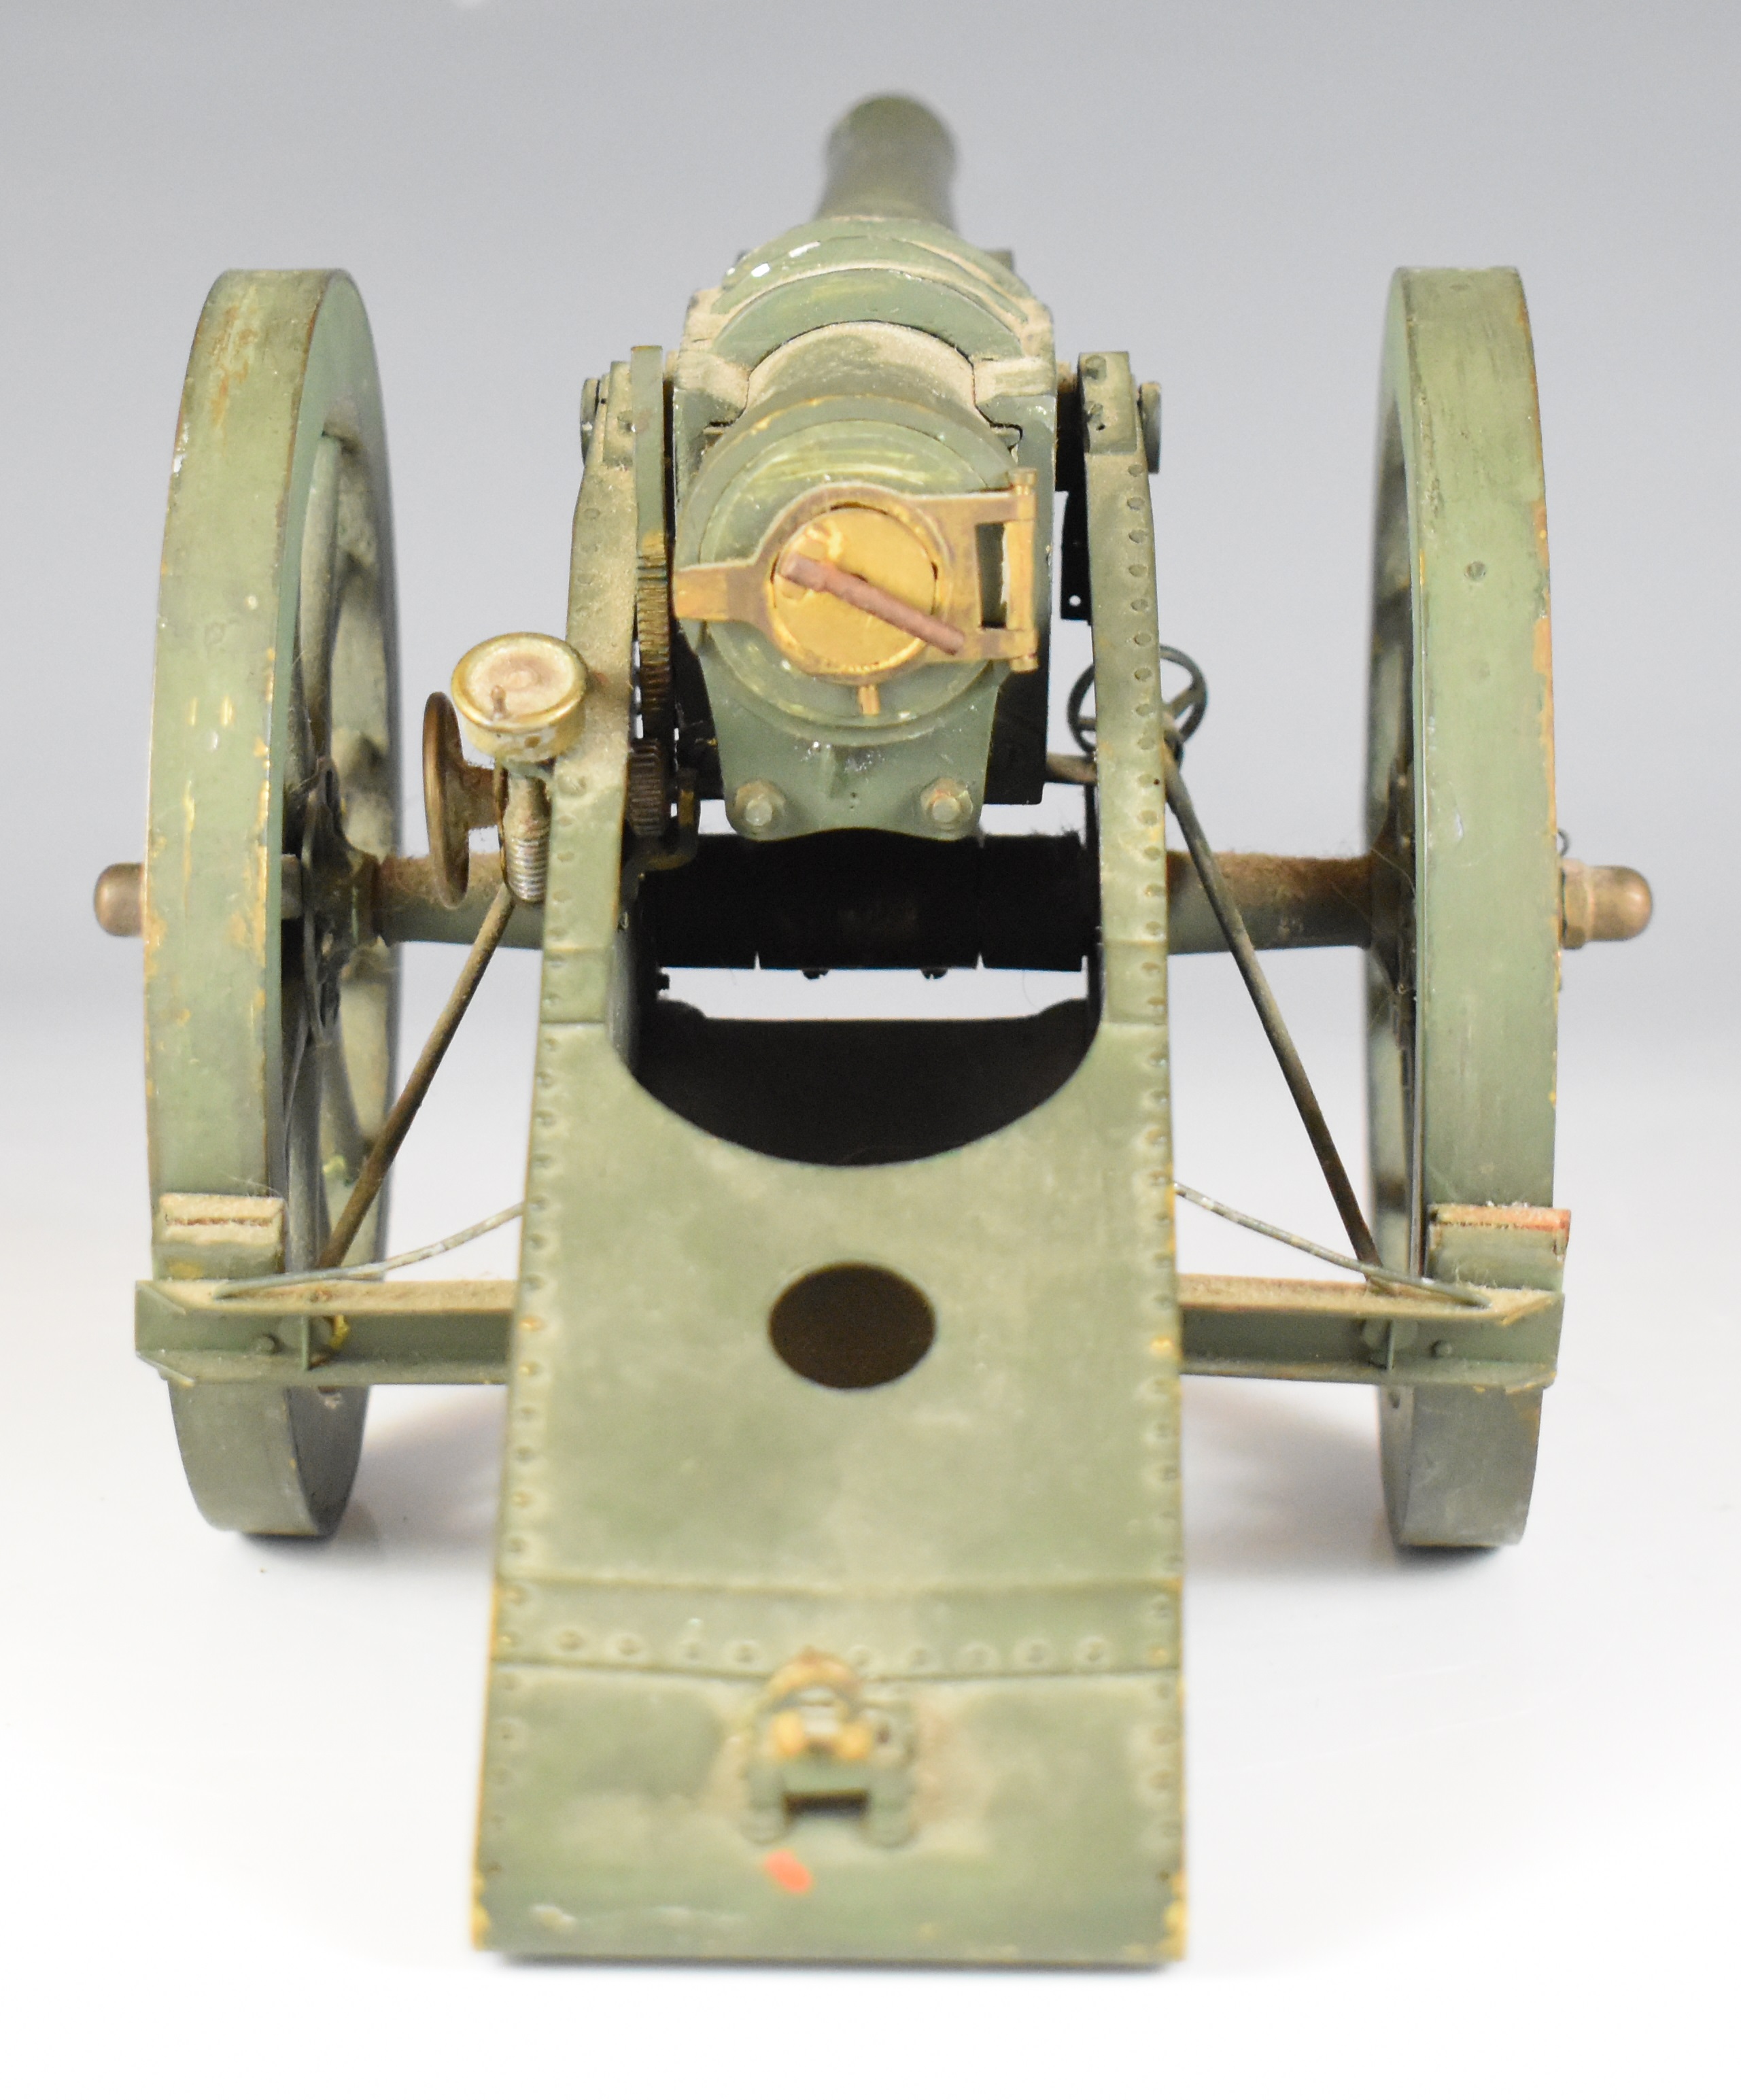 Breech loading desk cannon or field gun with 7 inch graduated barrel, overall length 28.5cm. - Image 5 of 8